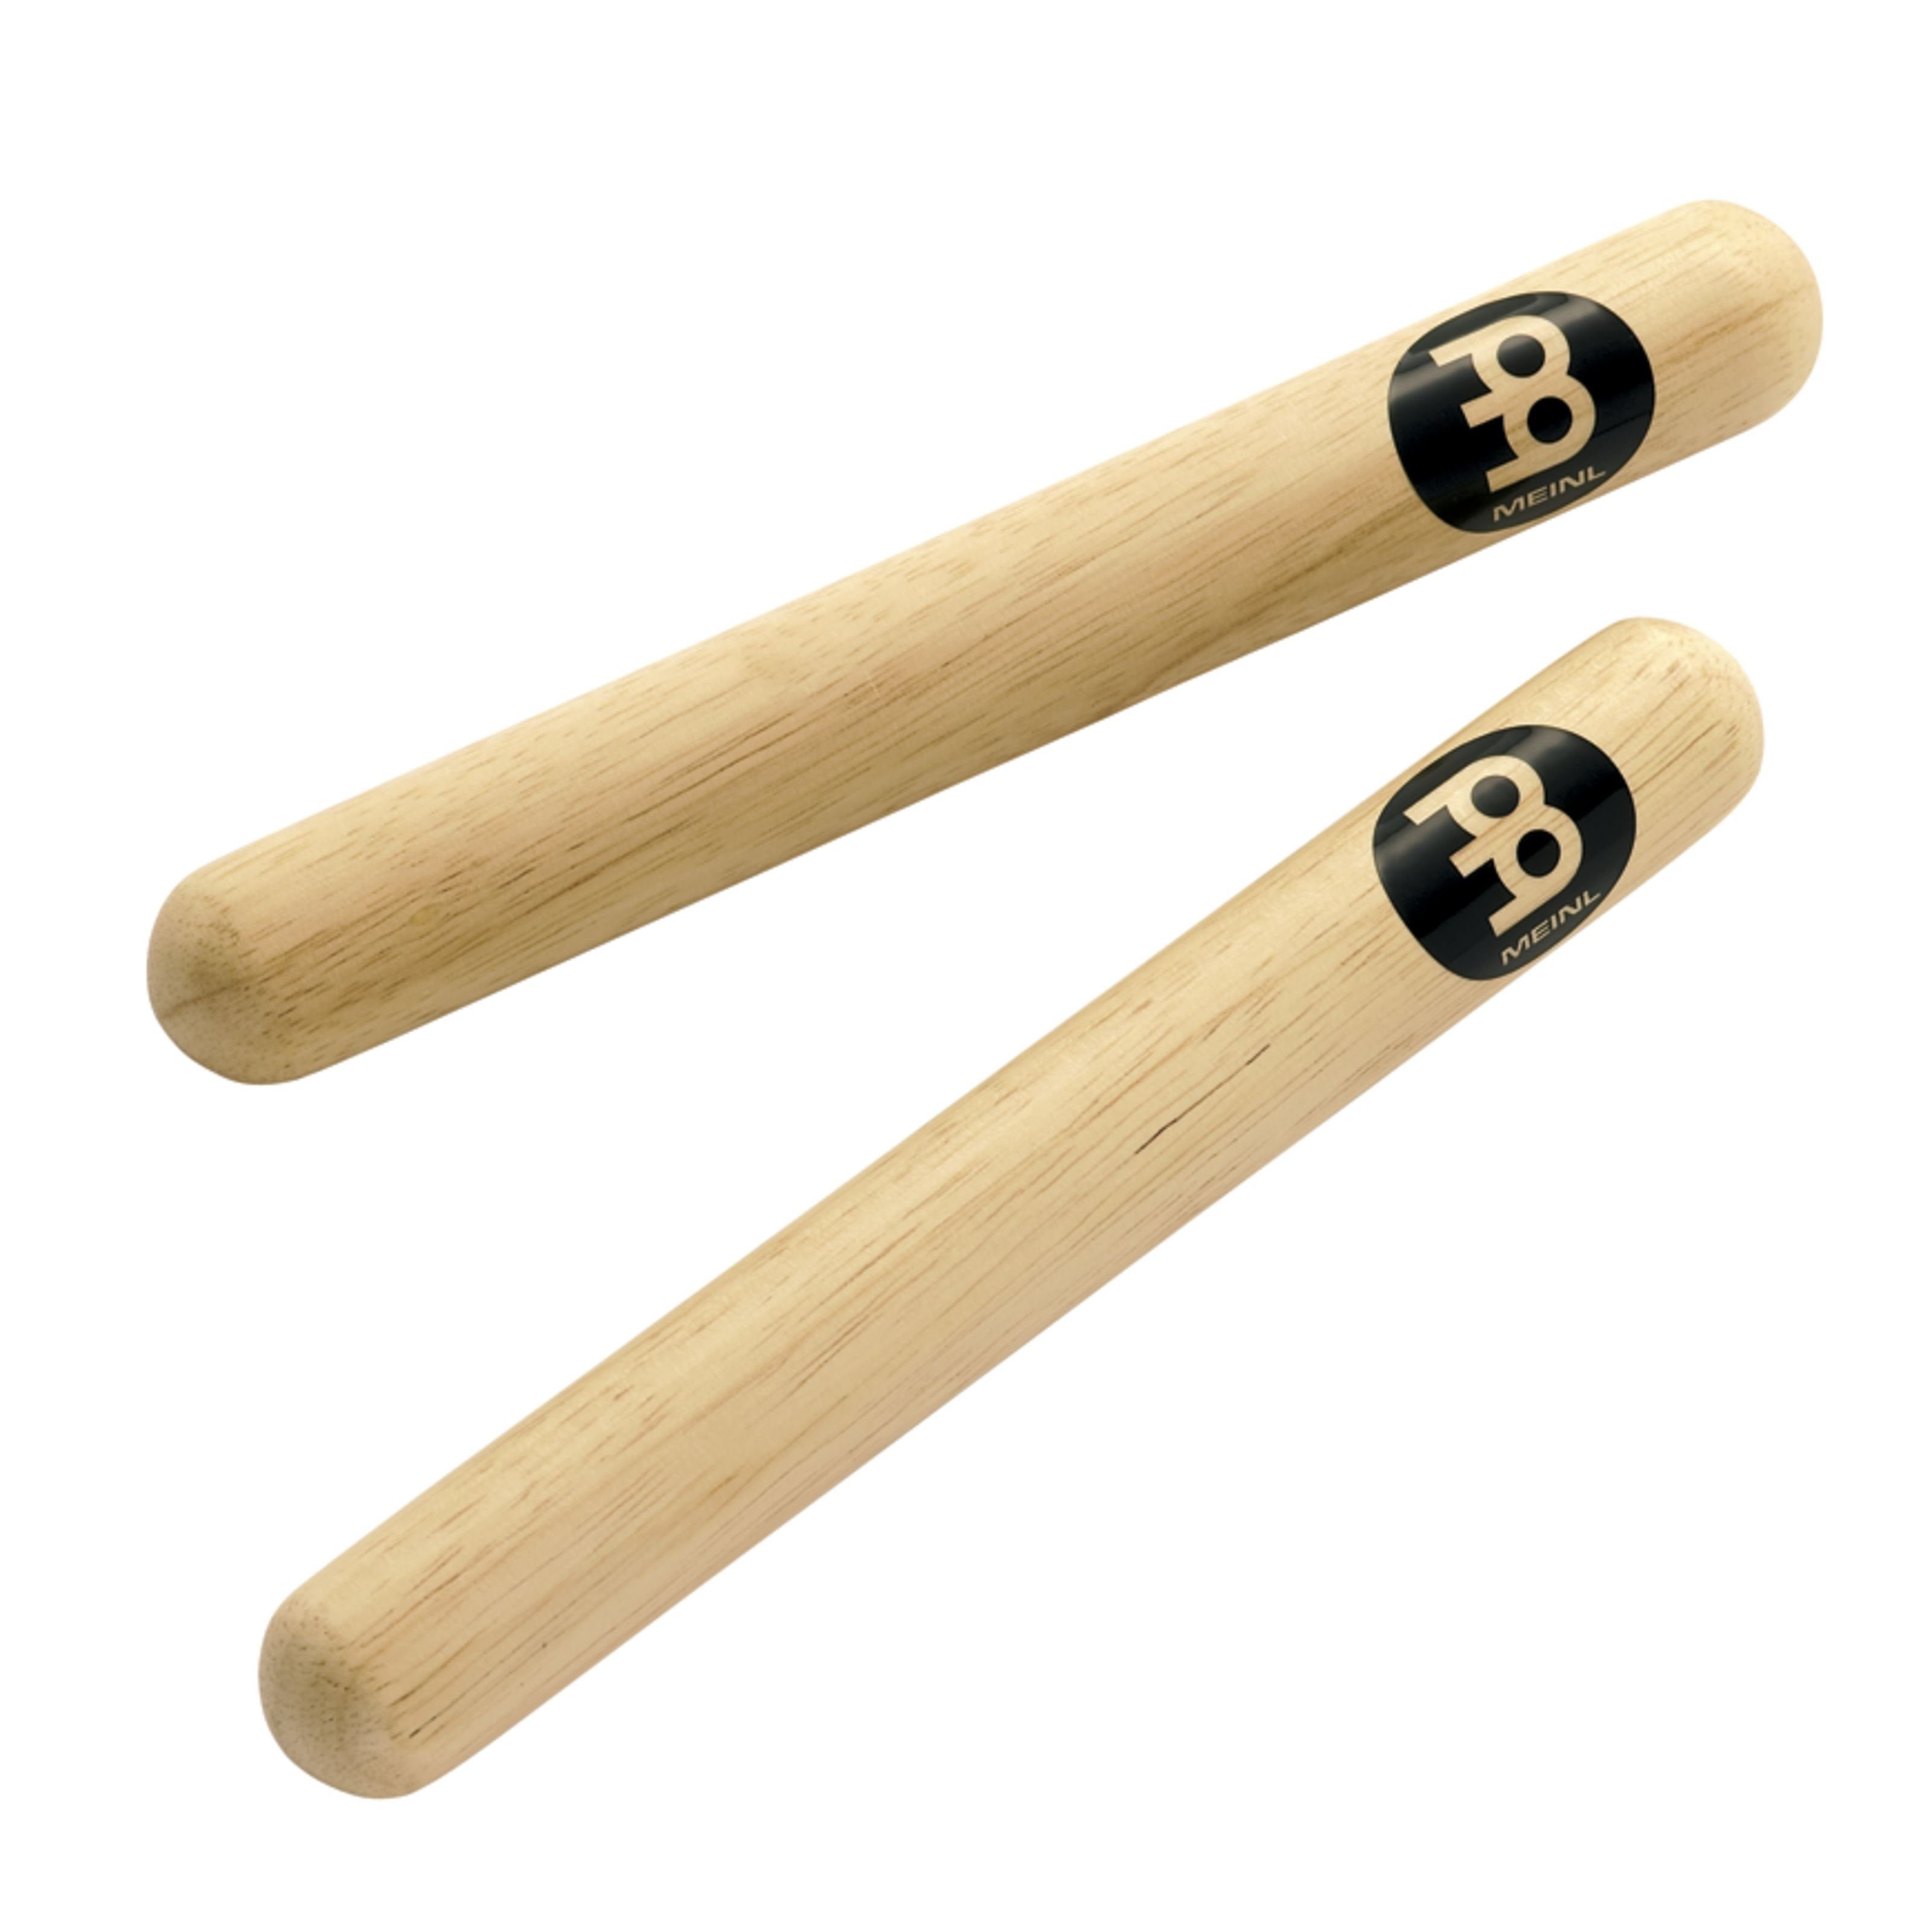 Meinl Percussion Spielzeug-Musikinstrument, CL1HW Hardwood Claves - Claves